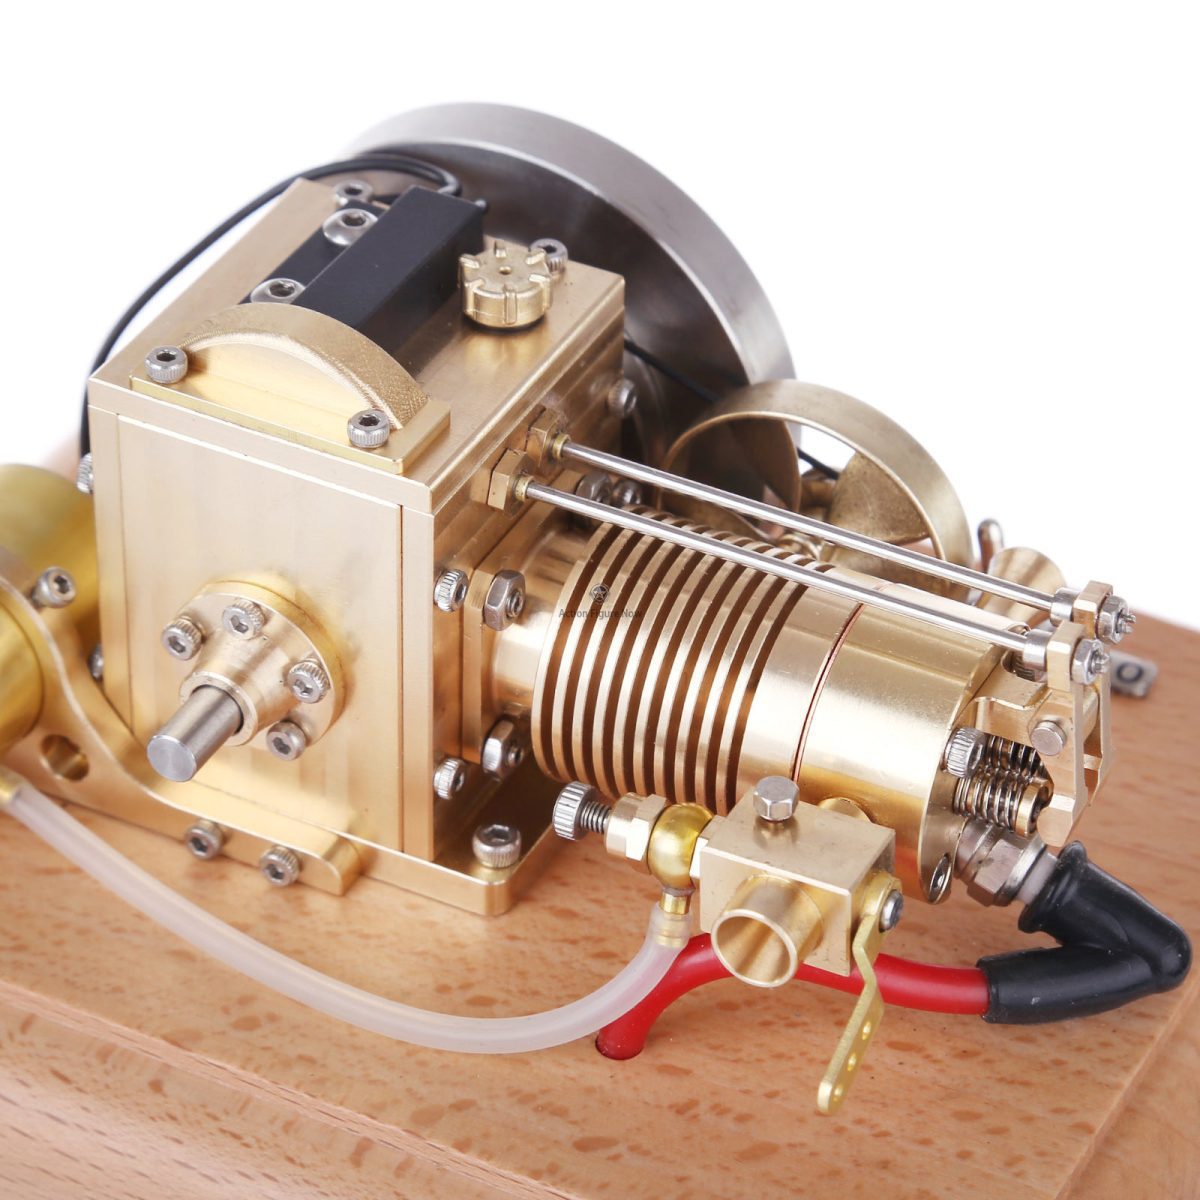 M16B 1.6cc Mini 4-Stroke Gas Engine Model, Horizontal Air-Cooled, Single Cylinder Internal Combustion Engine with Wooden Base